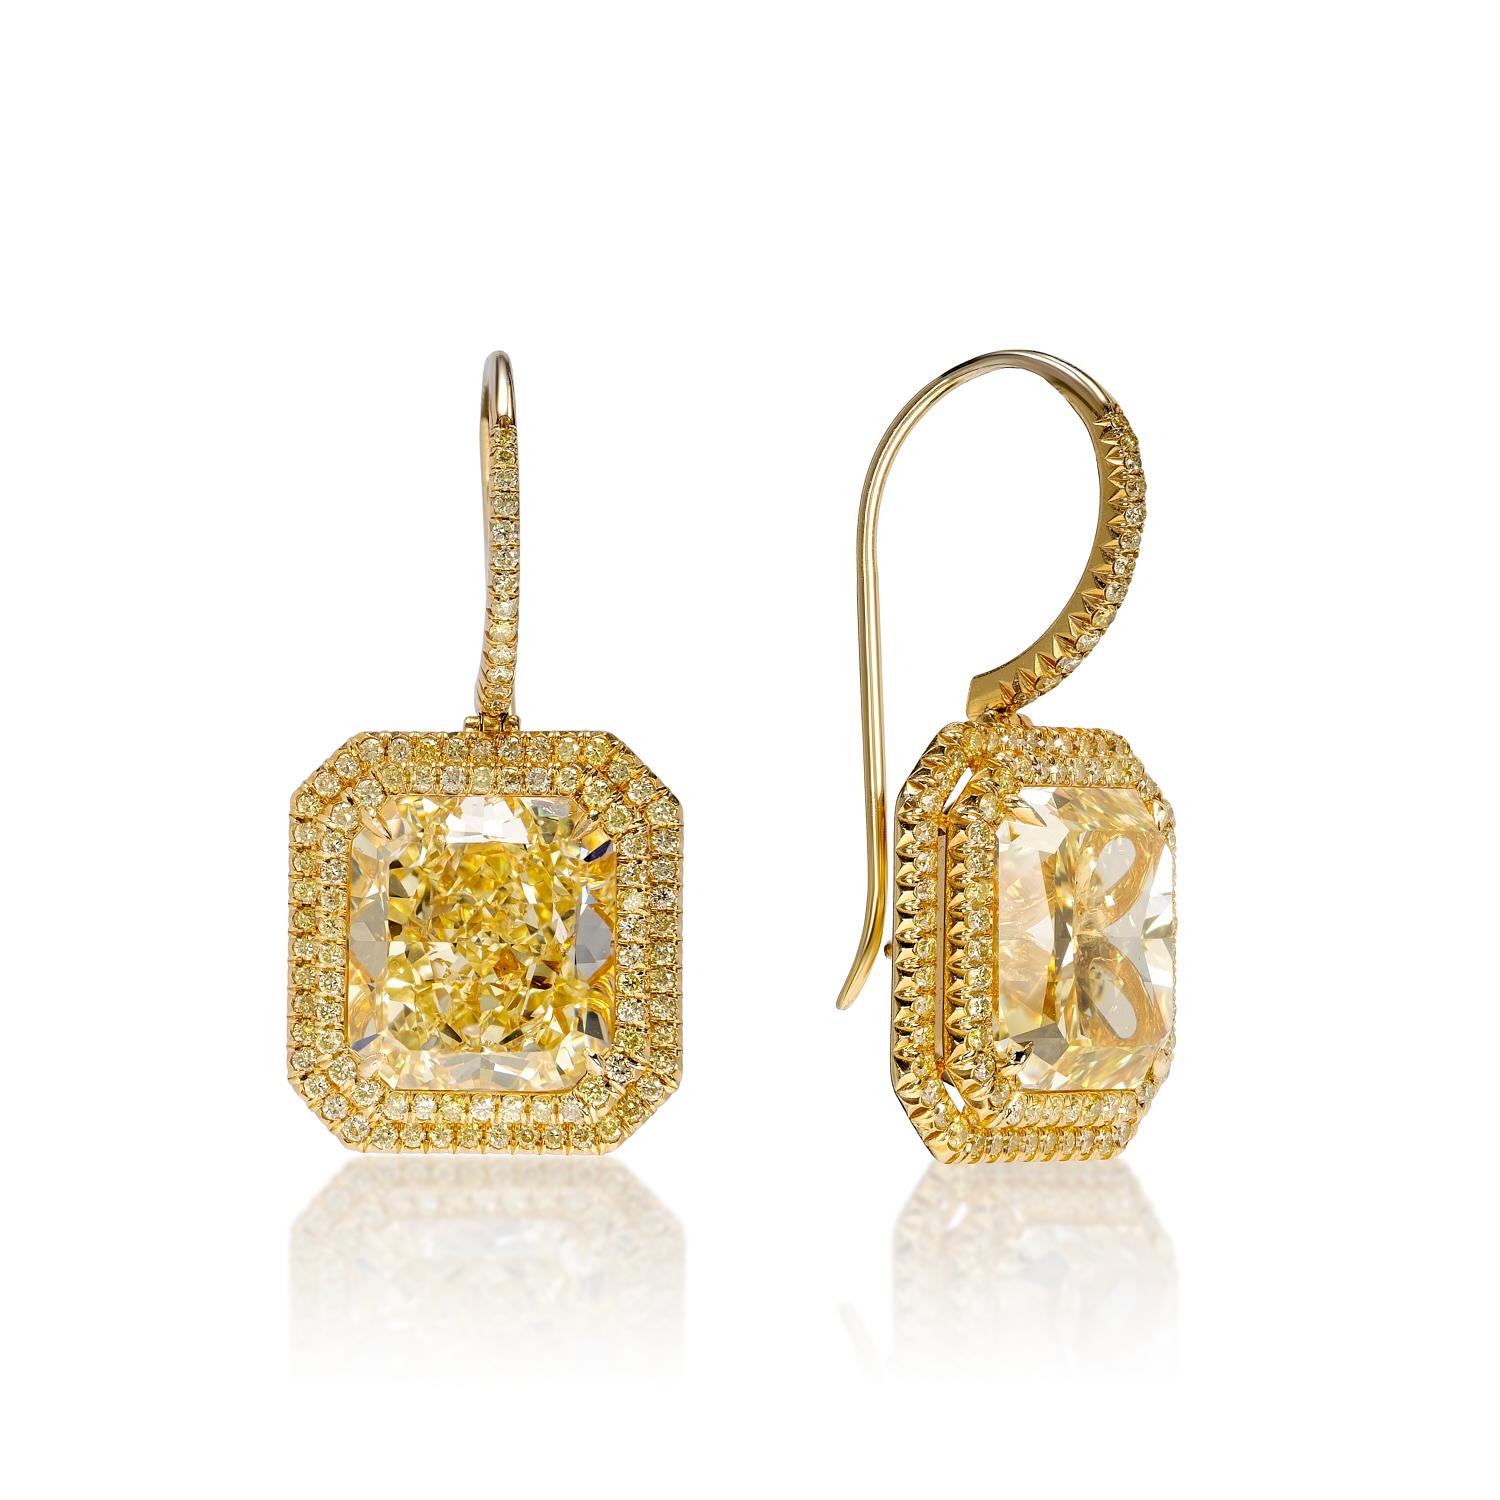 21 Carat Radiant Cut Diamond Drop Earrings GIA Certified Fancy Yellow VS1-VVS1 In New Condition For Sale In New York, NY